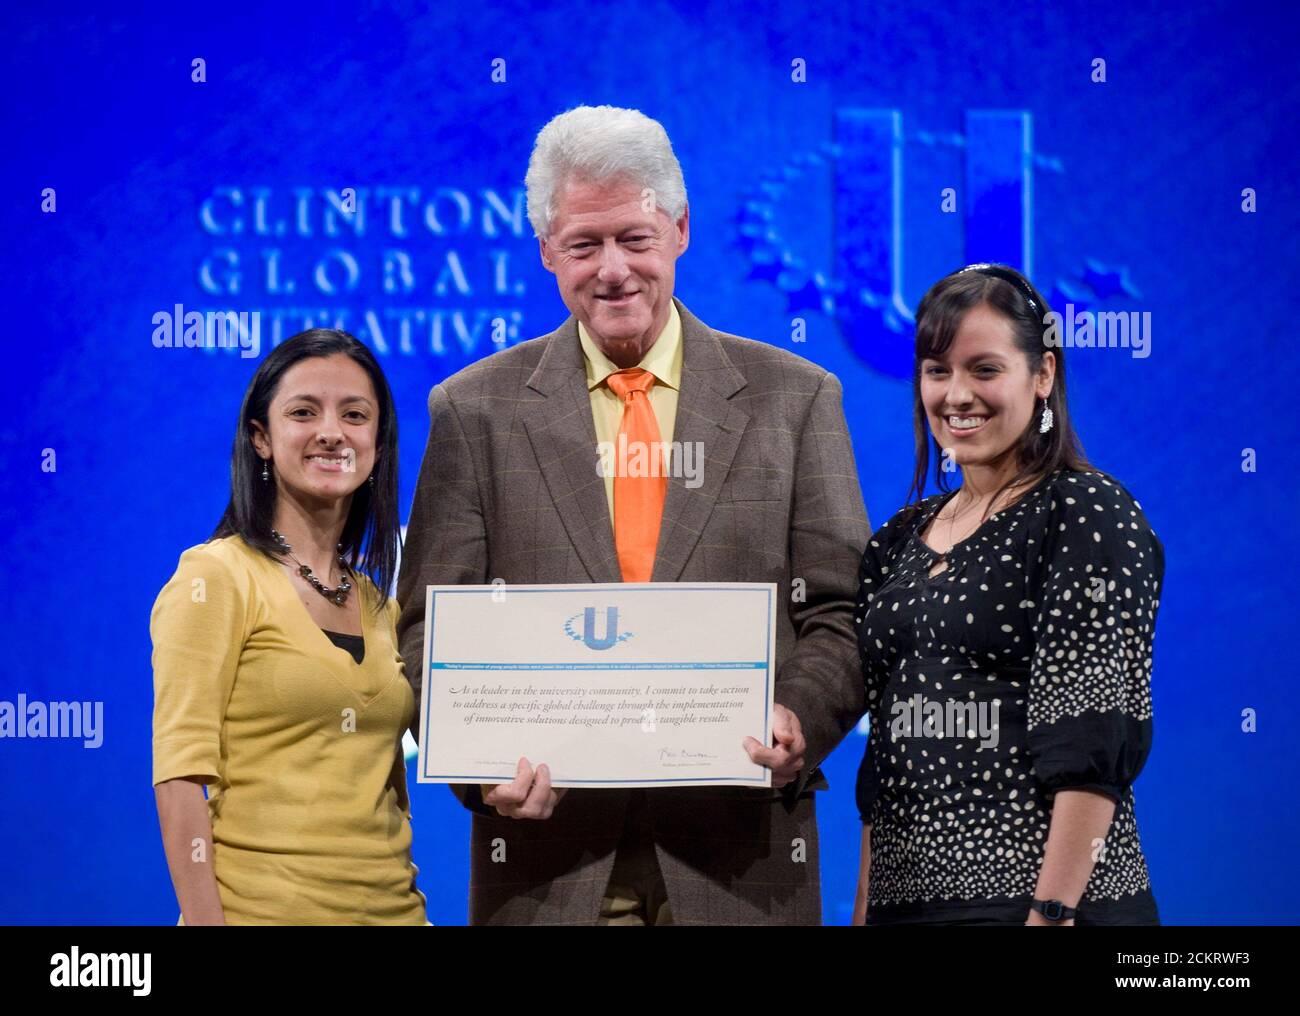 Austin, TX February 14, 2009: Former President Bill Clinton hands out awards at the second annual Clinton Global Initiative University, a conference bringing together students to take action on global challenges such as poverty, hunger, energy, climate change and global health. The program is patterned after Clinton Global Initiative Foundation formed by President Bill Clinton. ©Bob Daemmrich Stock Photo